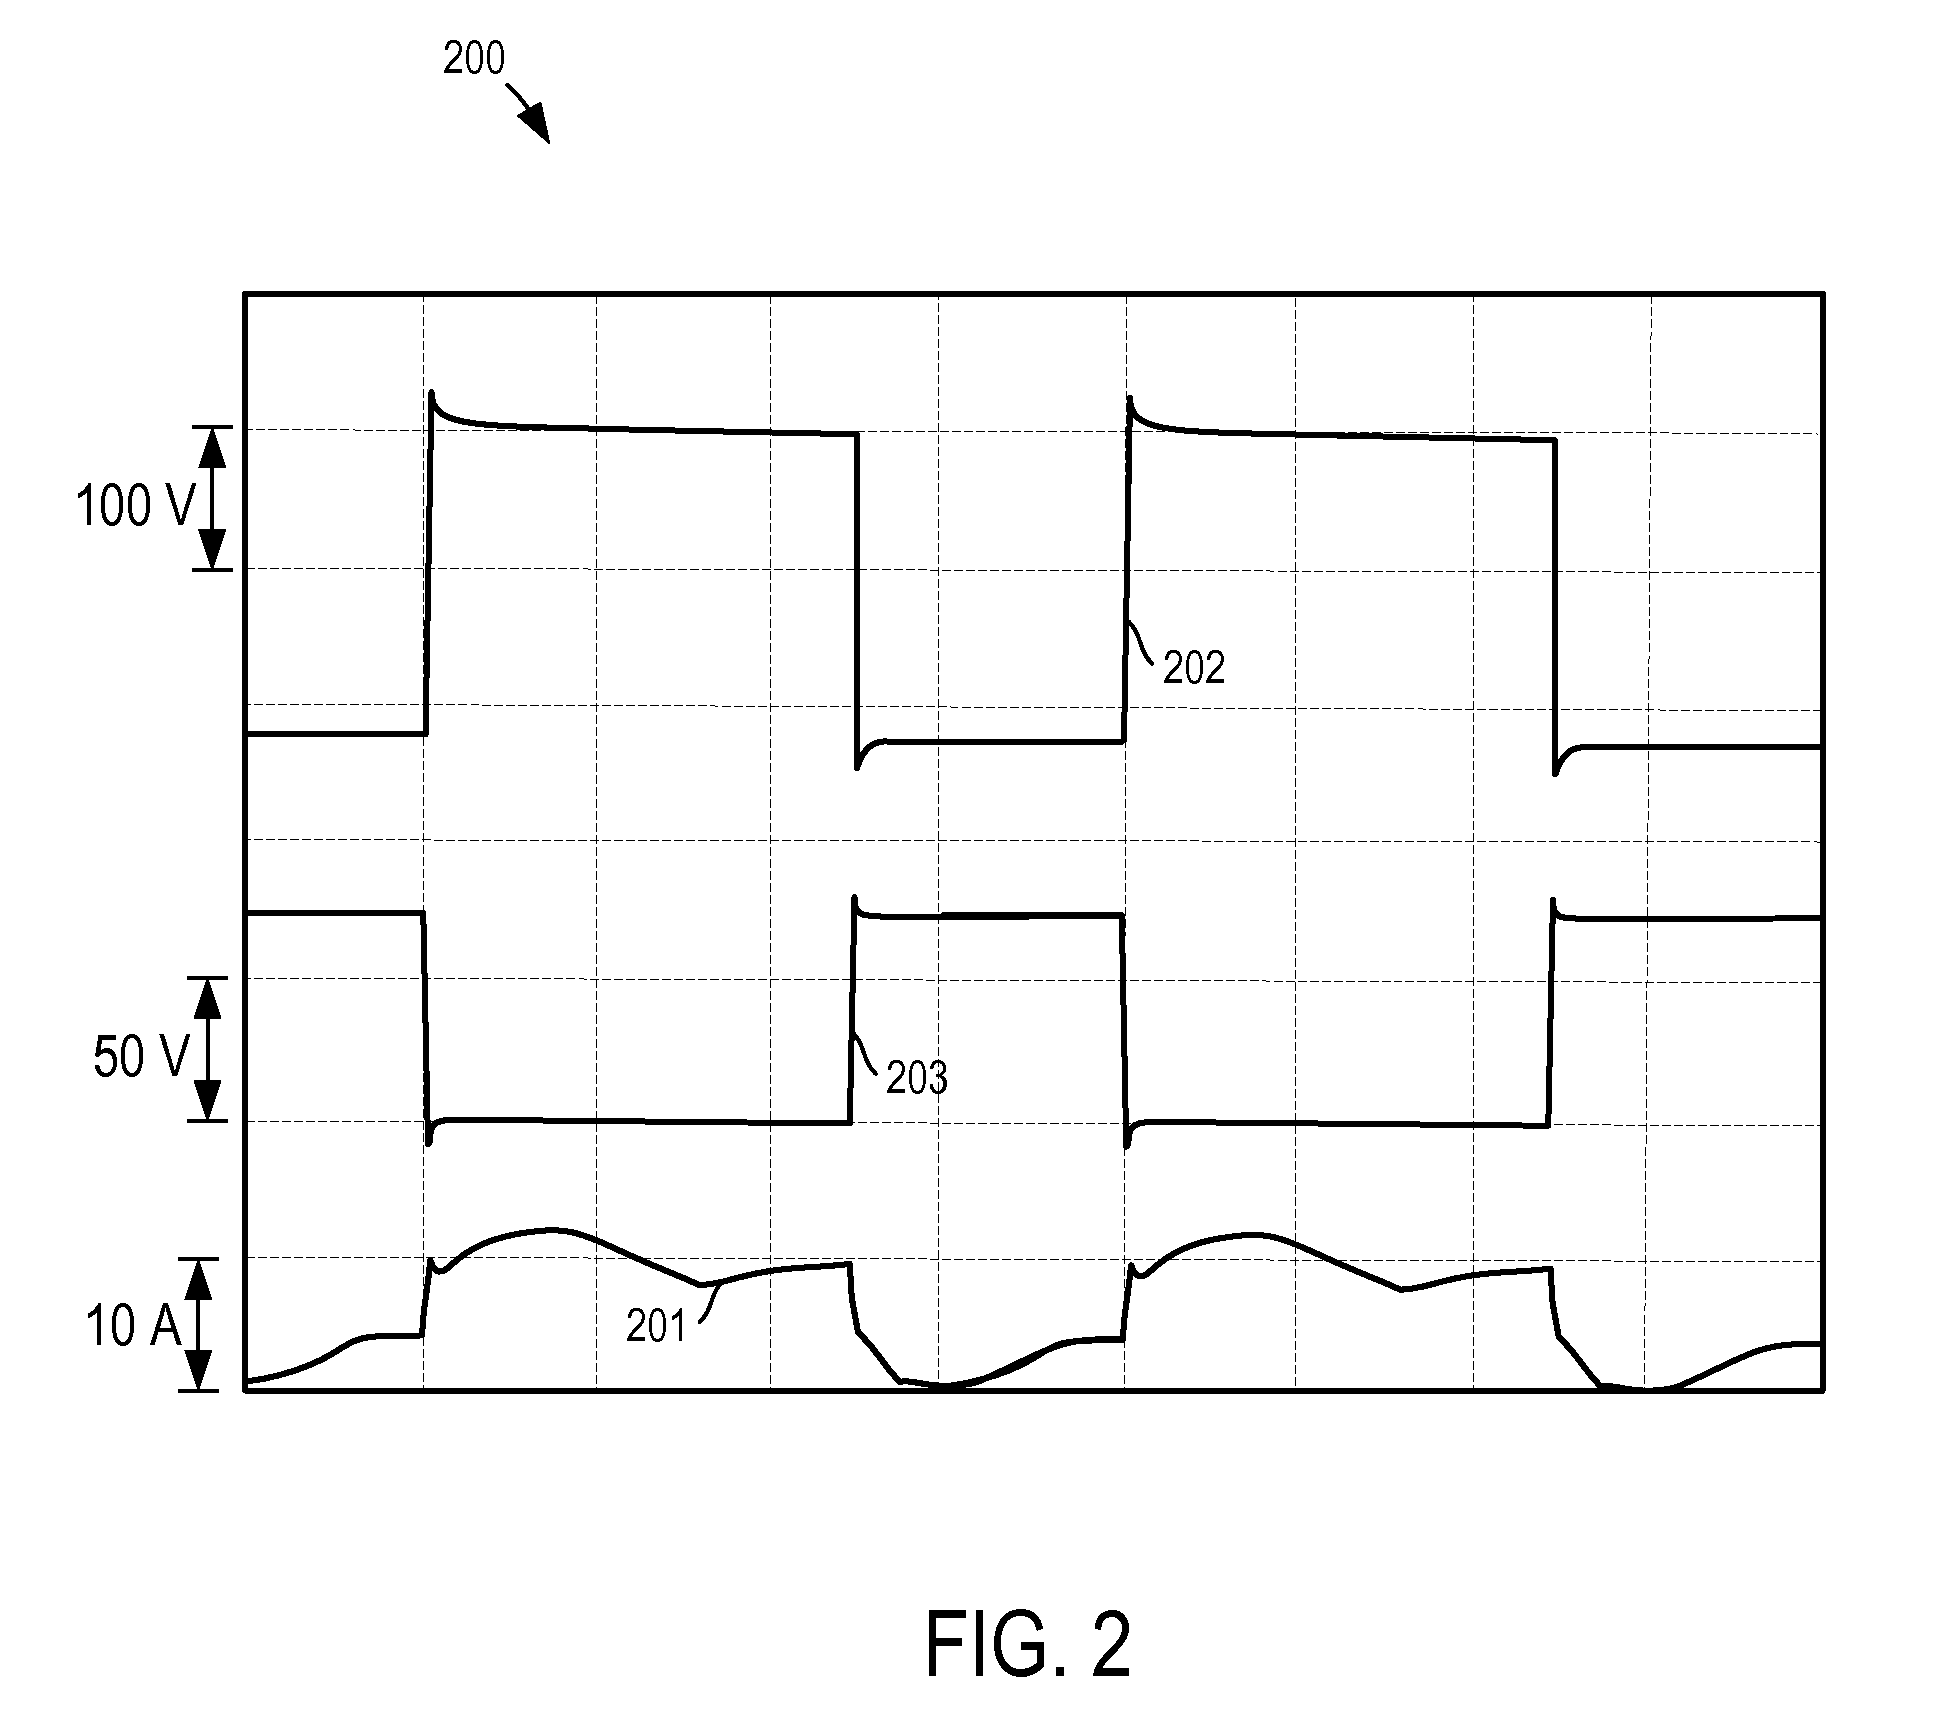 Systems to Connect Multiple Direct Current Energy Sources to an Alternating Current System